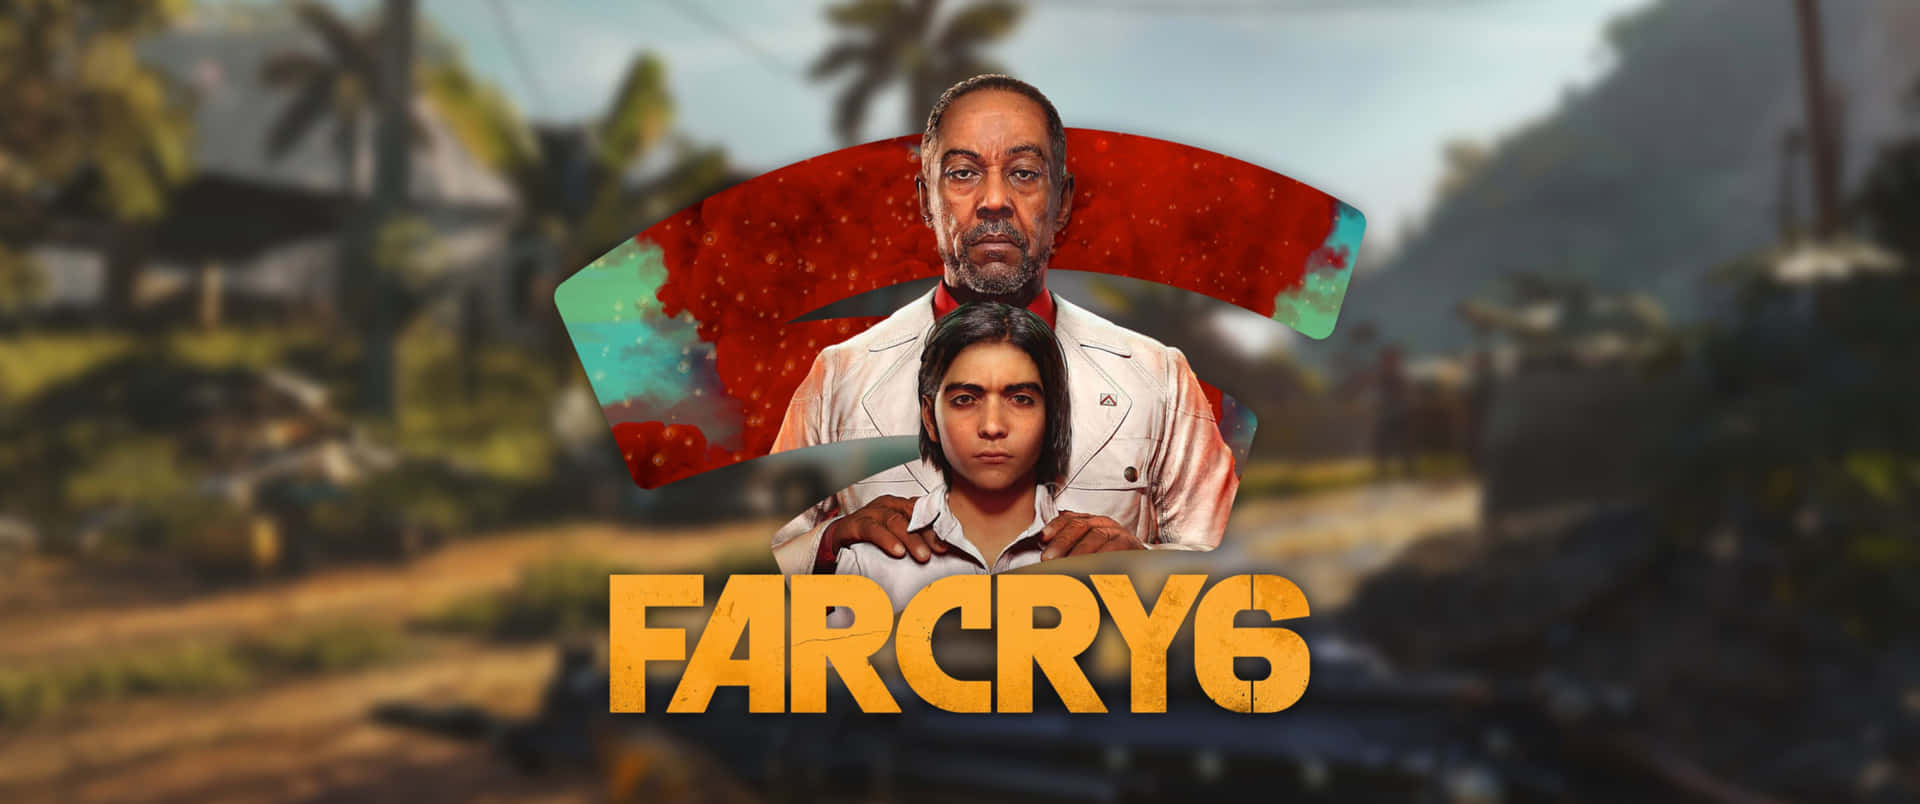 Explore the dangerous but beautiful post-apocalyptic world of Far Cry New Dawn.